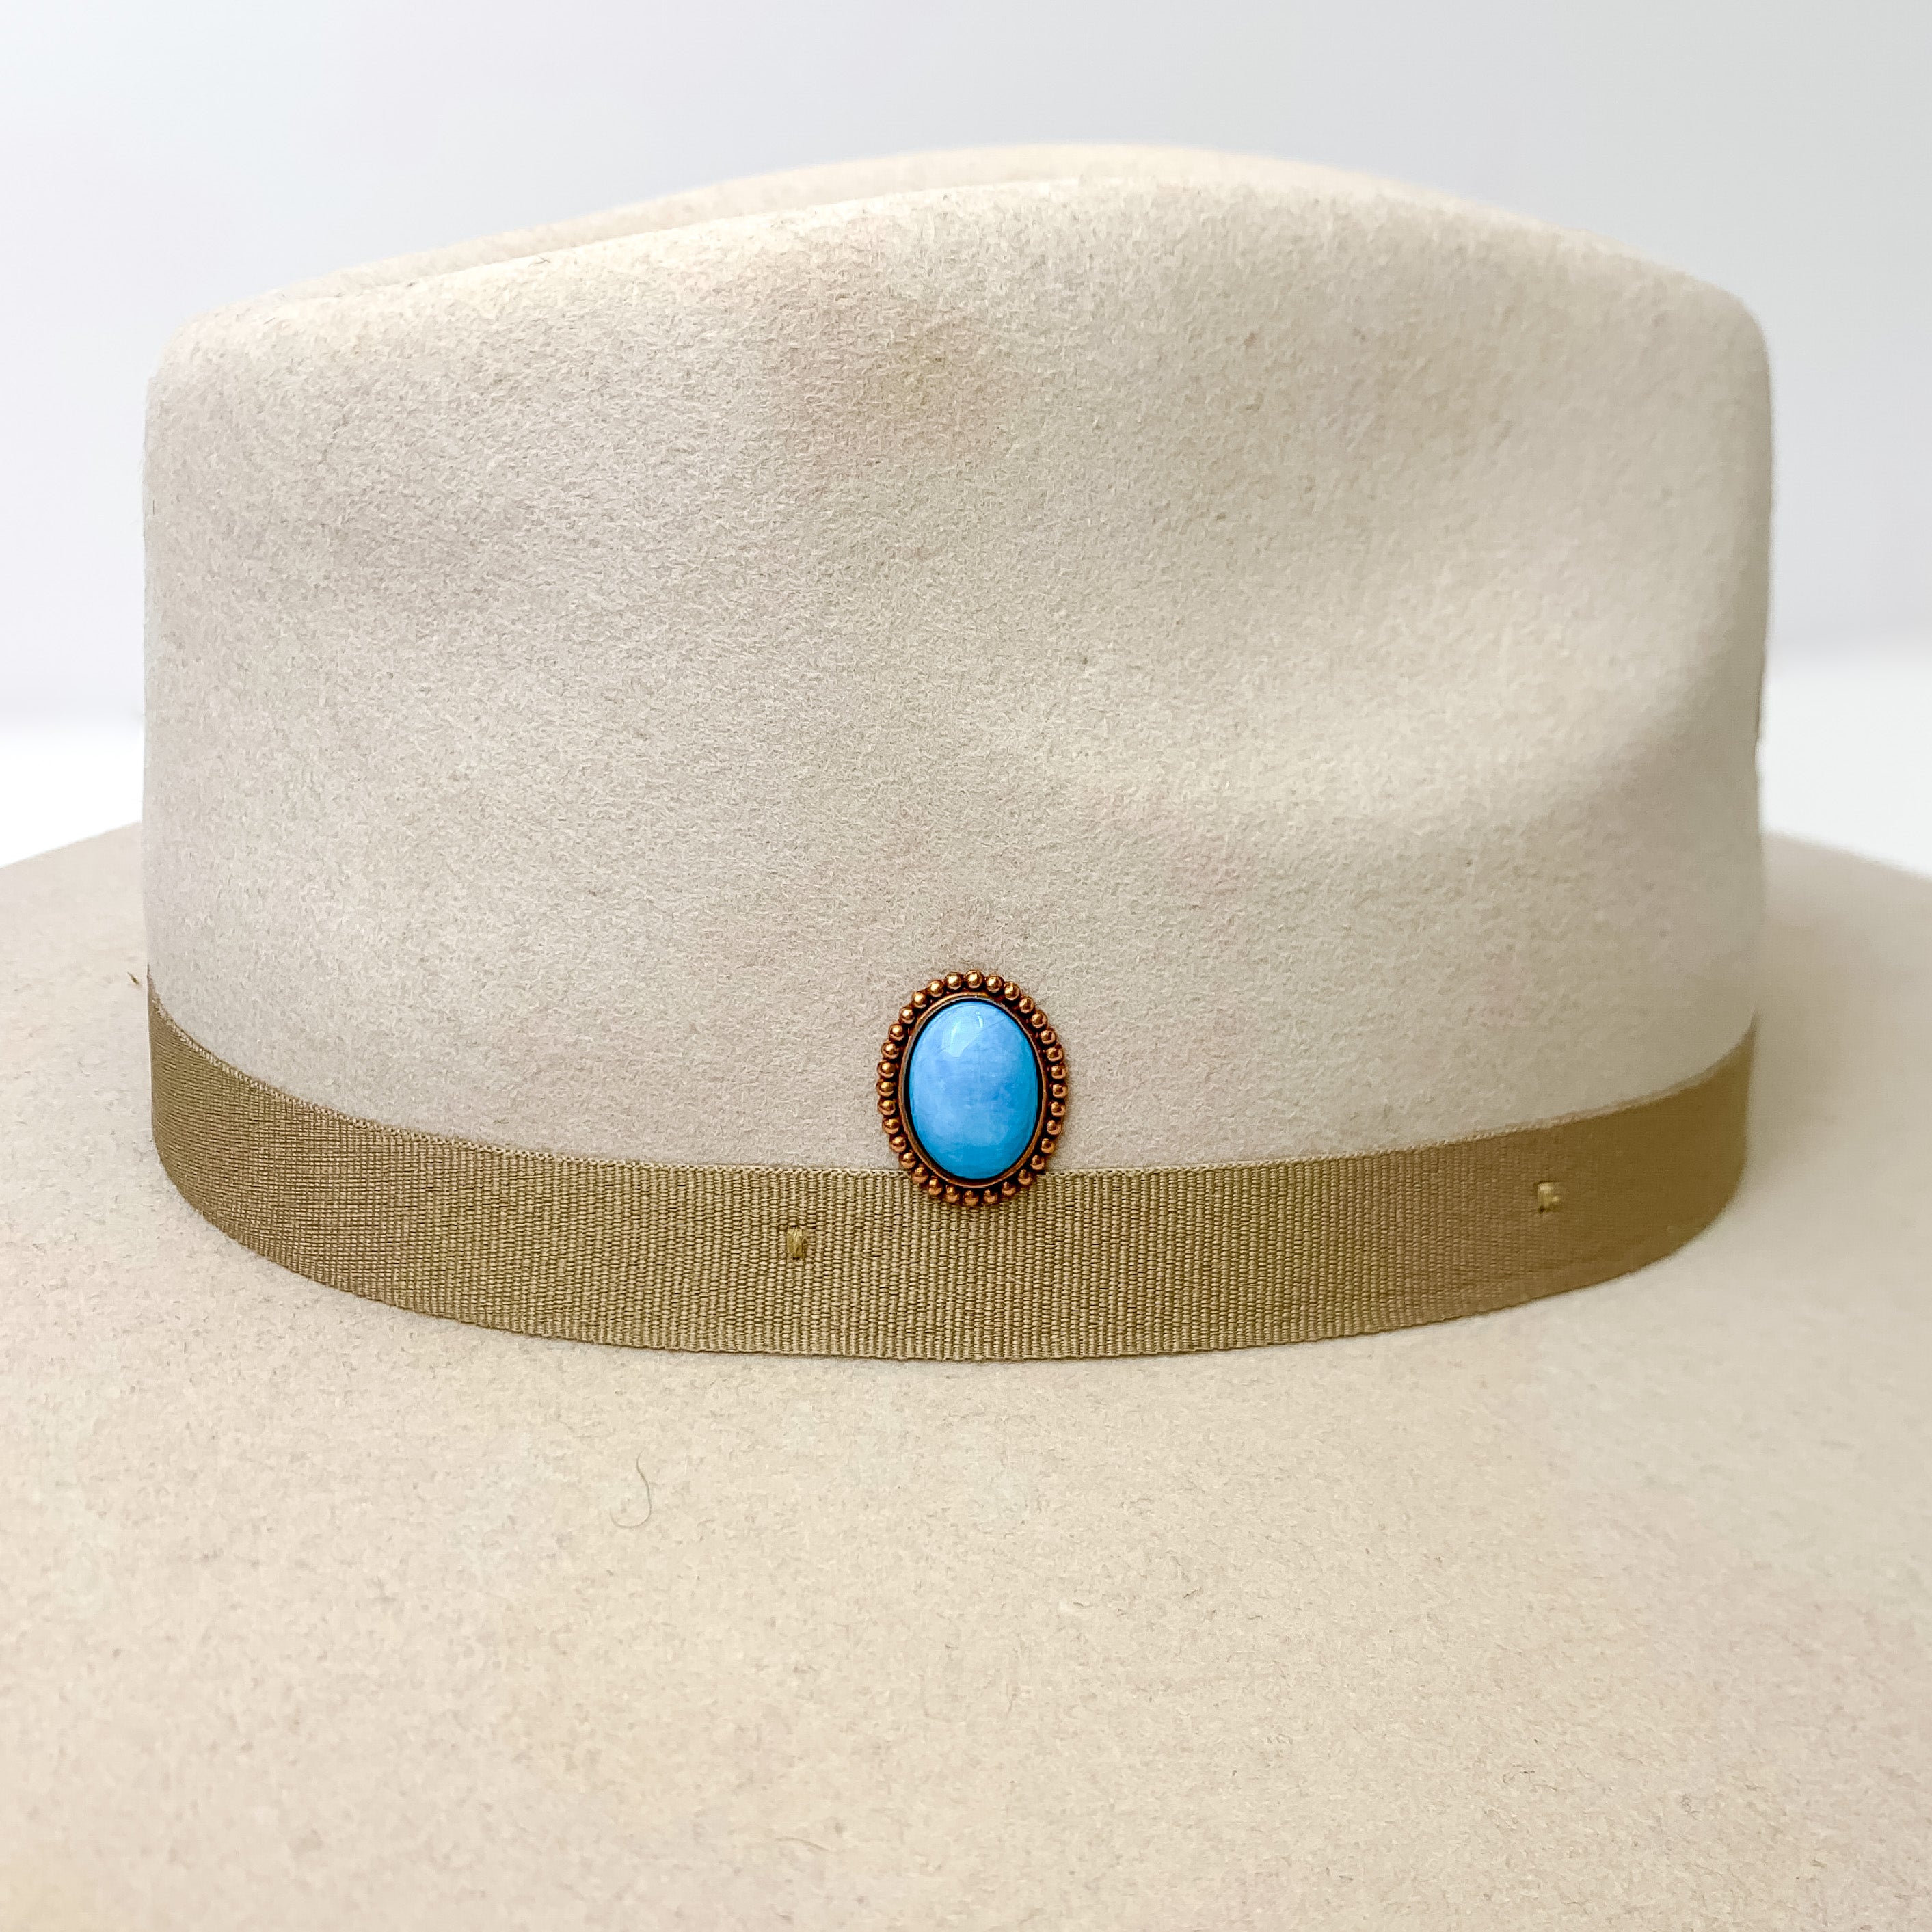 Pink Panache | Rose Gold Tone Oval Hat Pin with Turquoise Cabochon Stone - Giddy Up Glamour Boutique